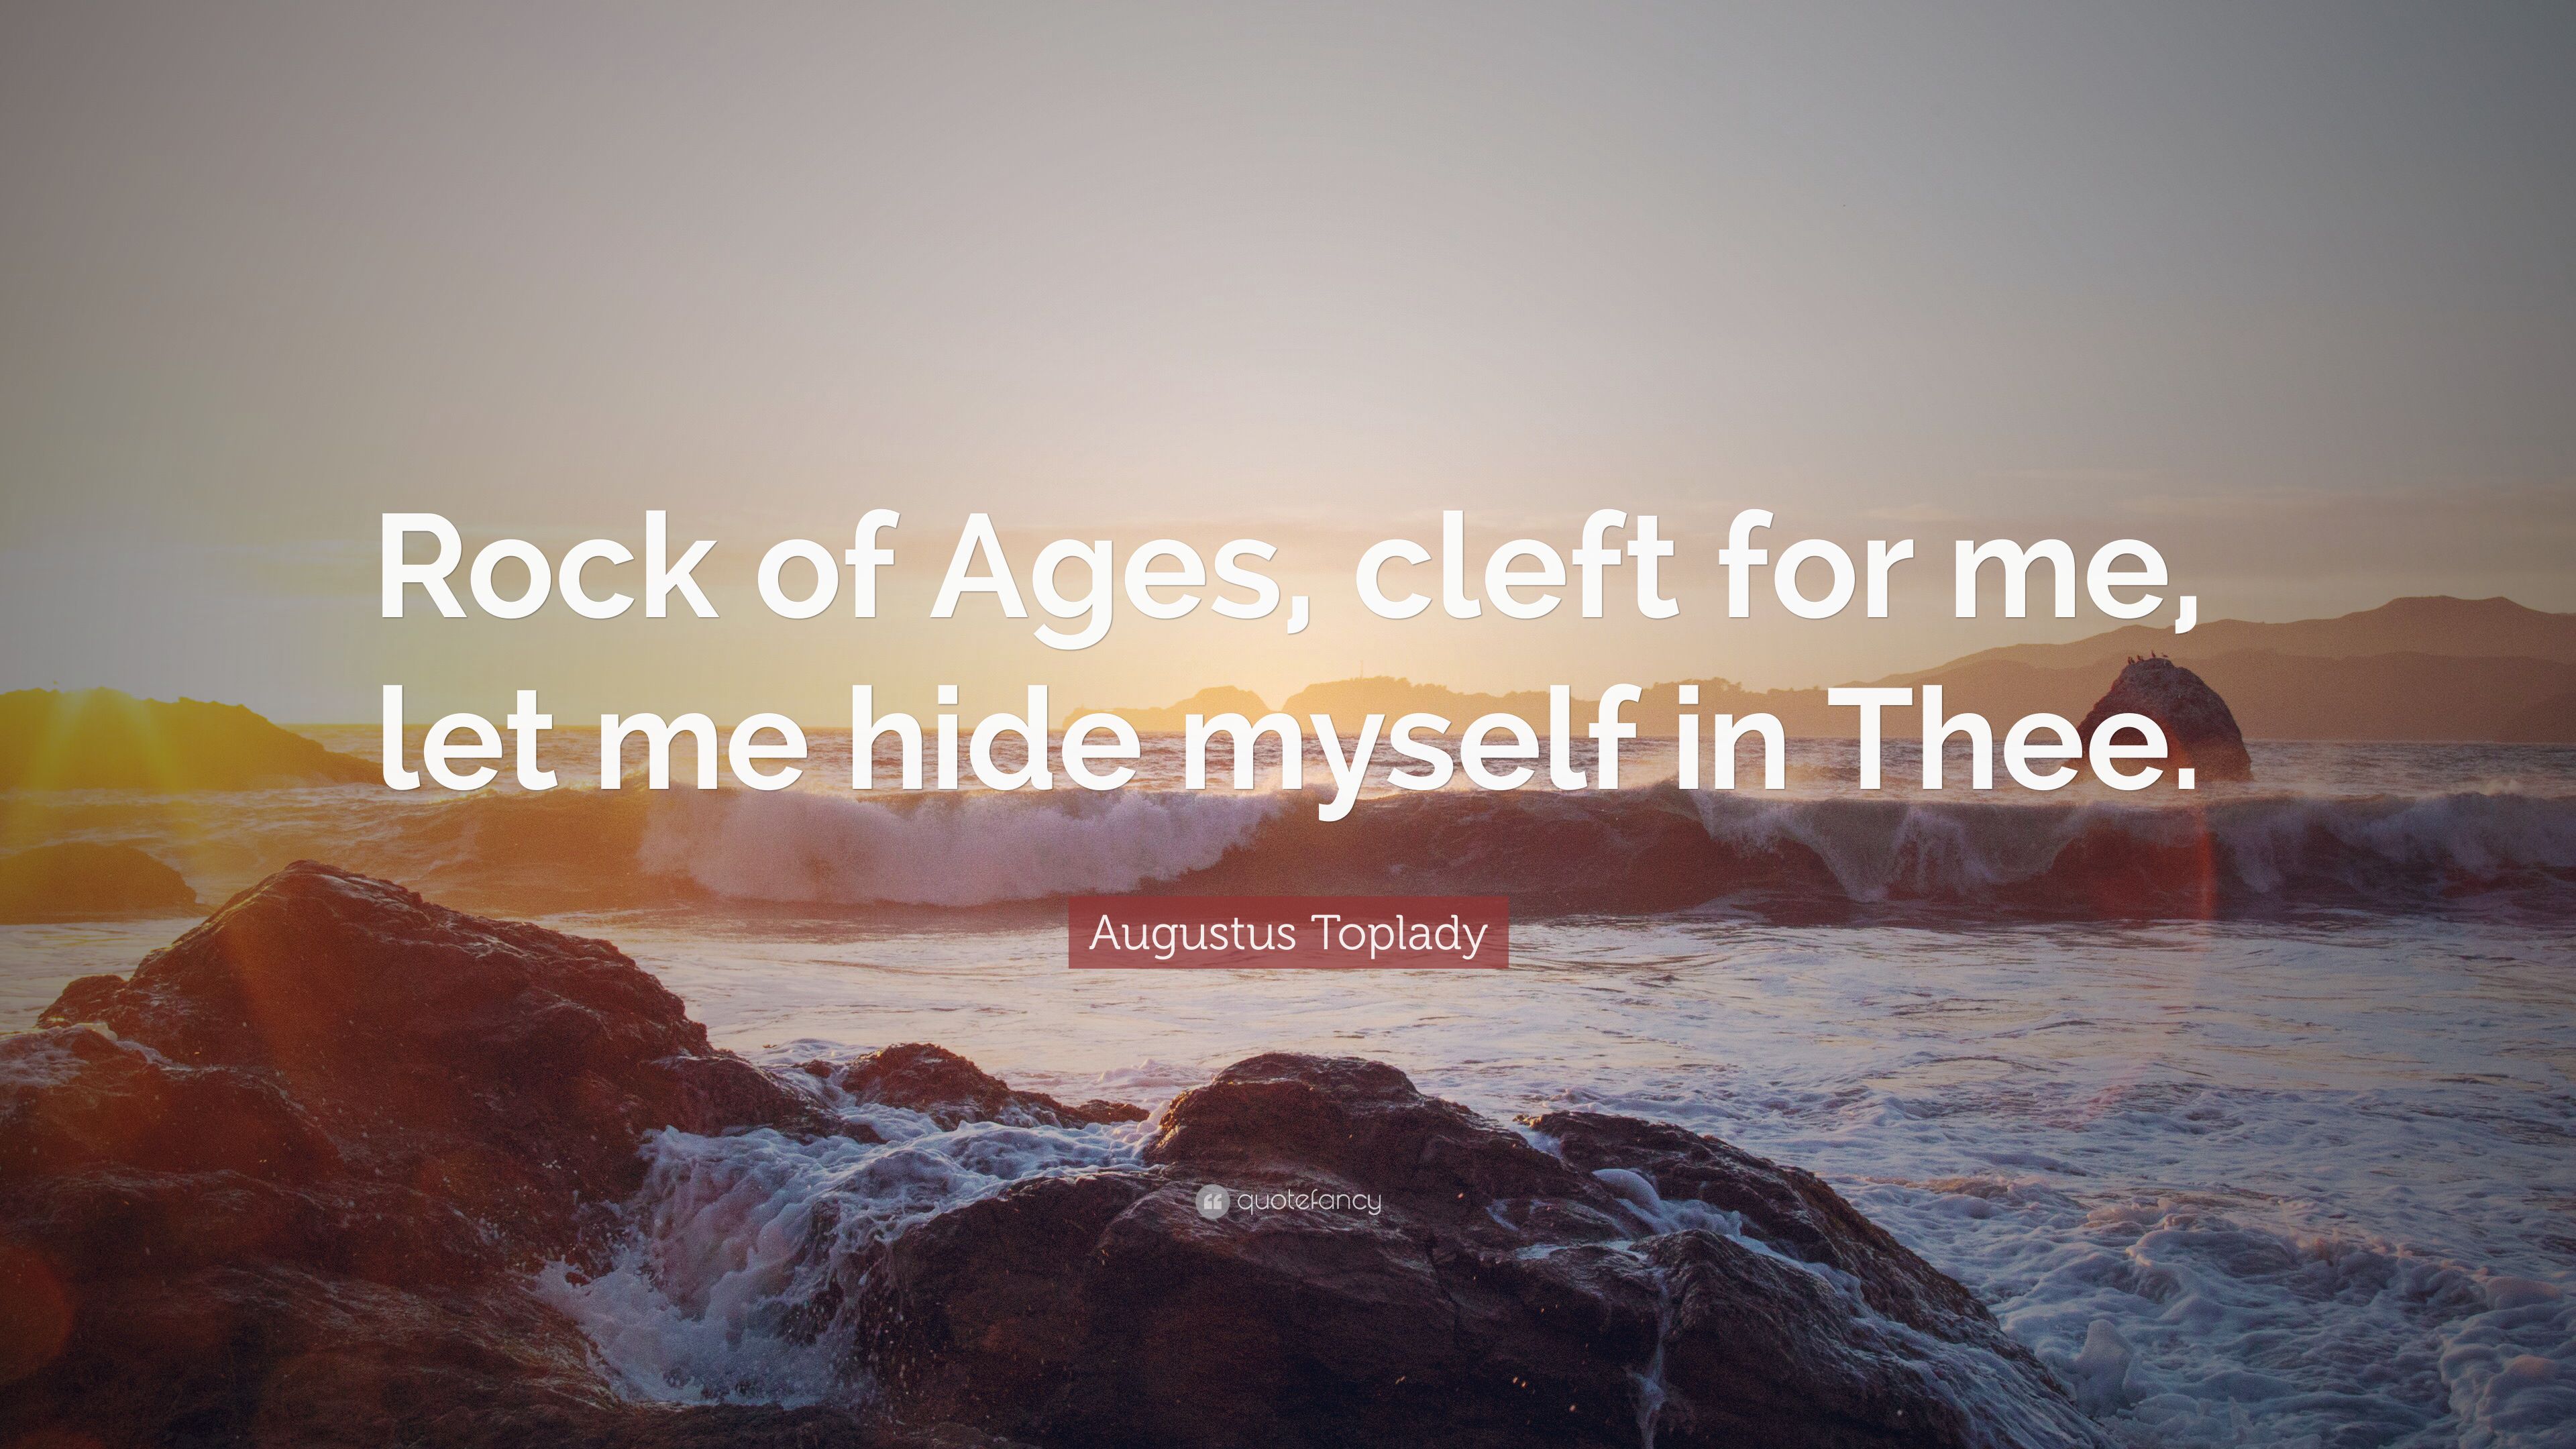 Augustus Toplady Quote: “Rock of Ages, cleft for me, let me hide